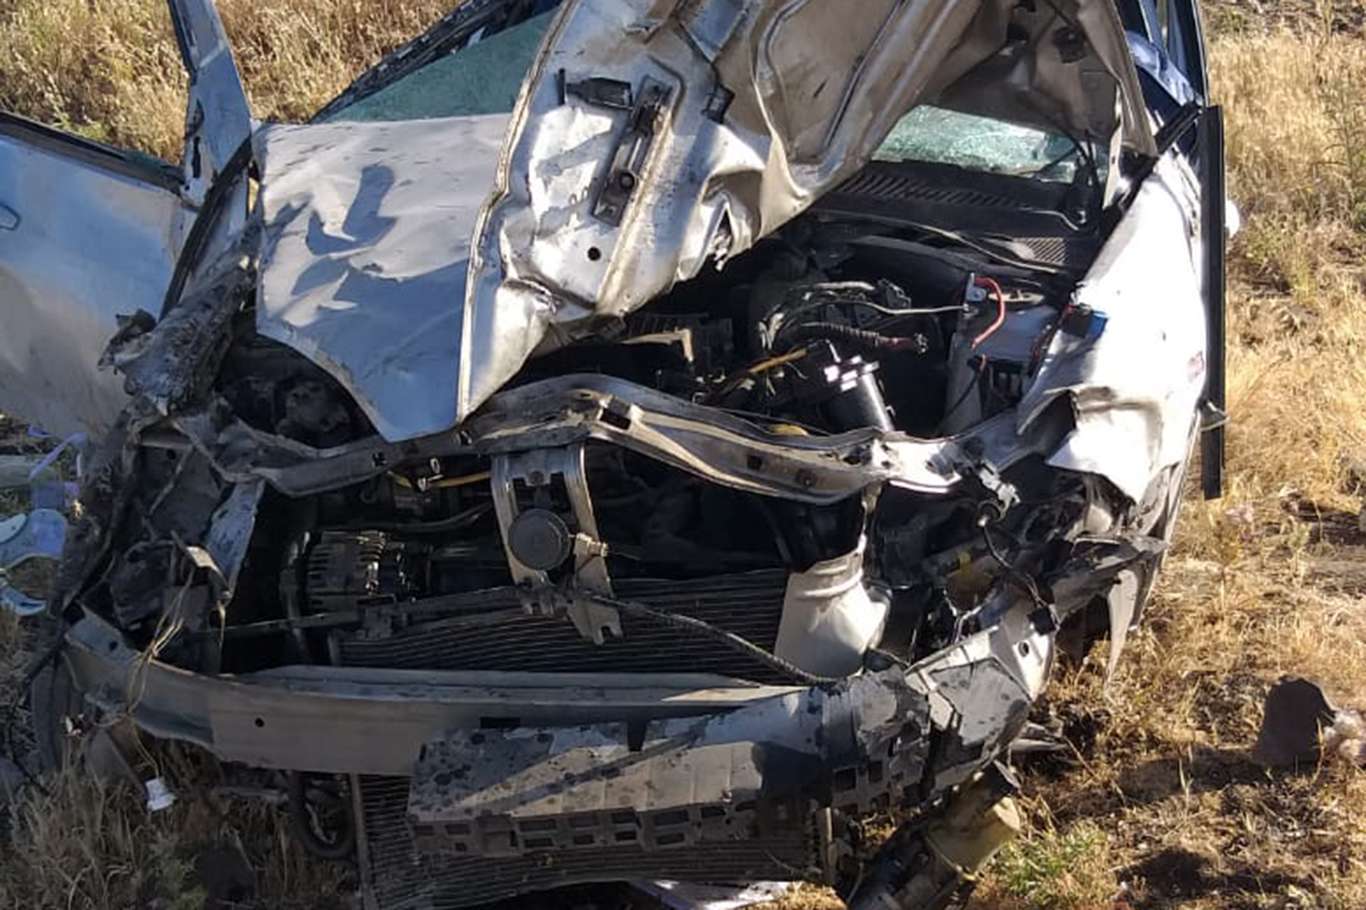 Nine-month-old baby killed; 5 others injured in road accident in southeastern Turkey